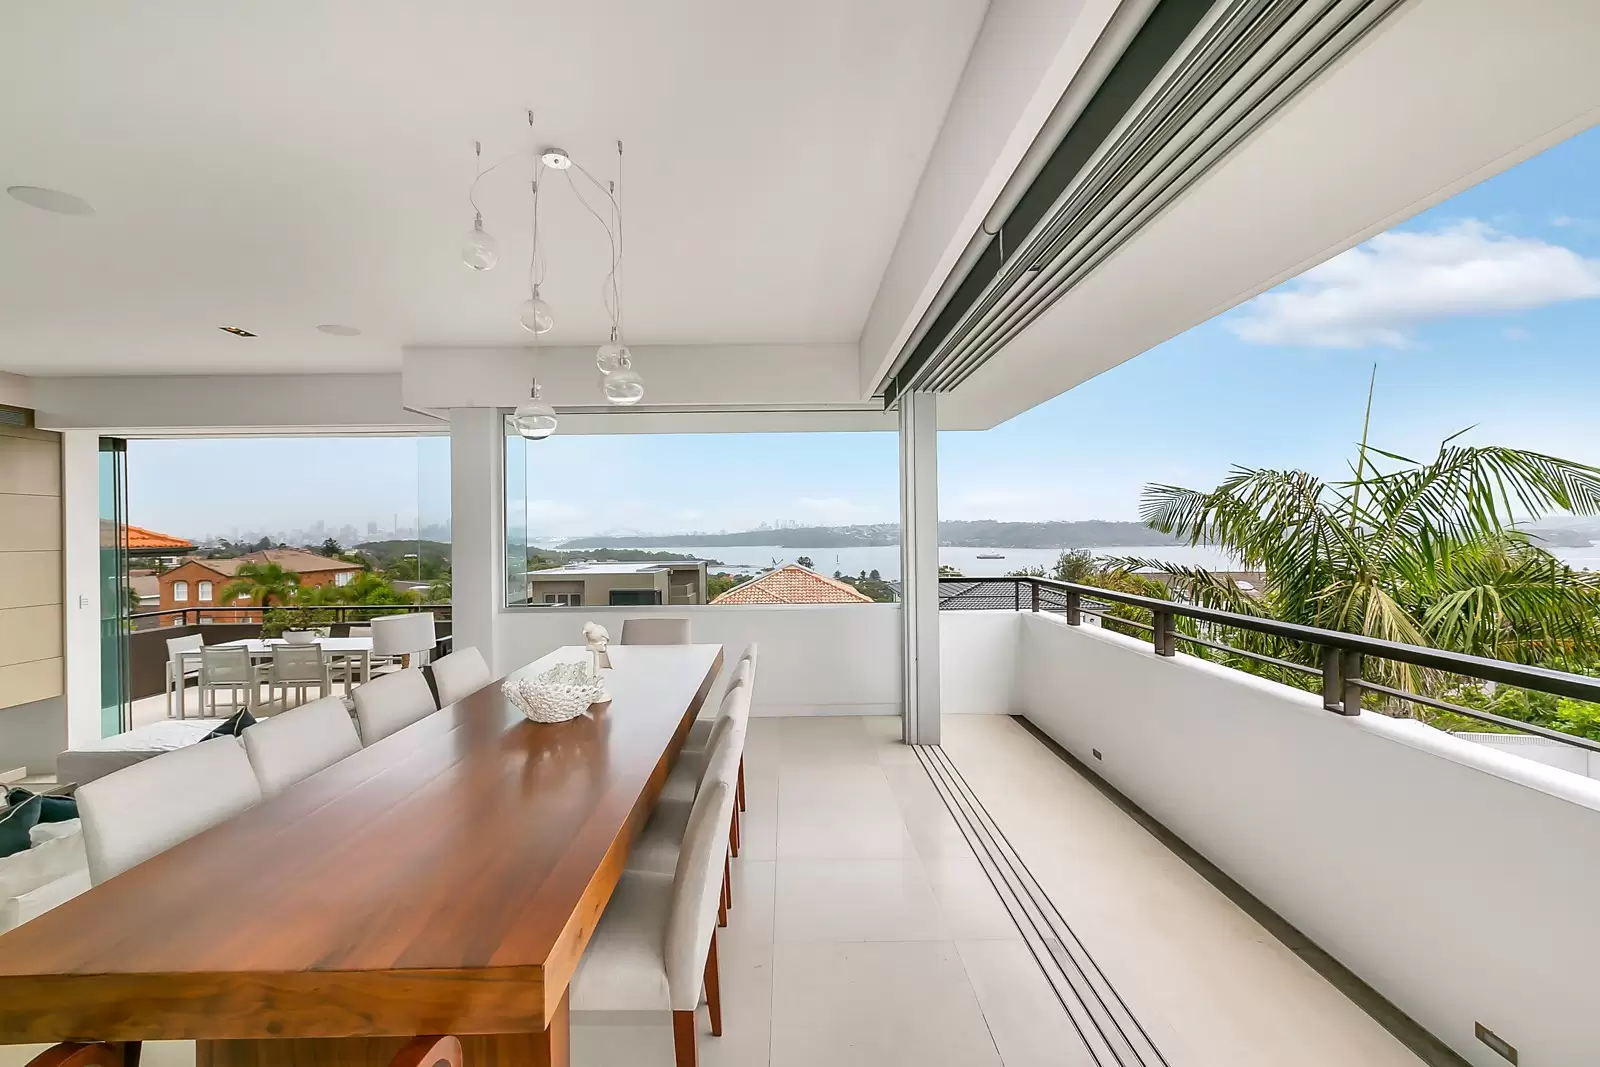 Photo #4: 37 Derby Street, Vaucluse - Sold by Sydney Sotheby's International Realty